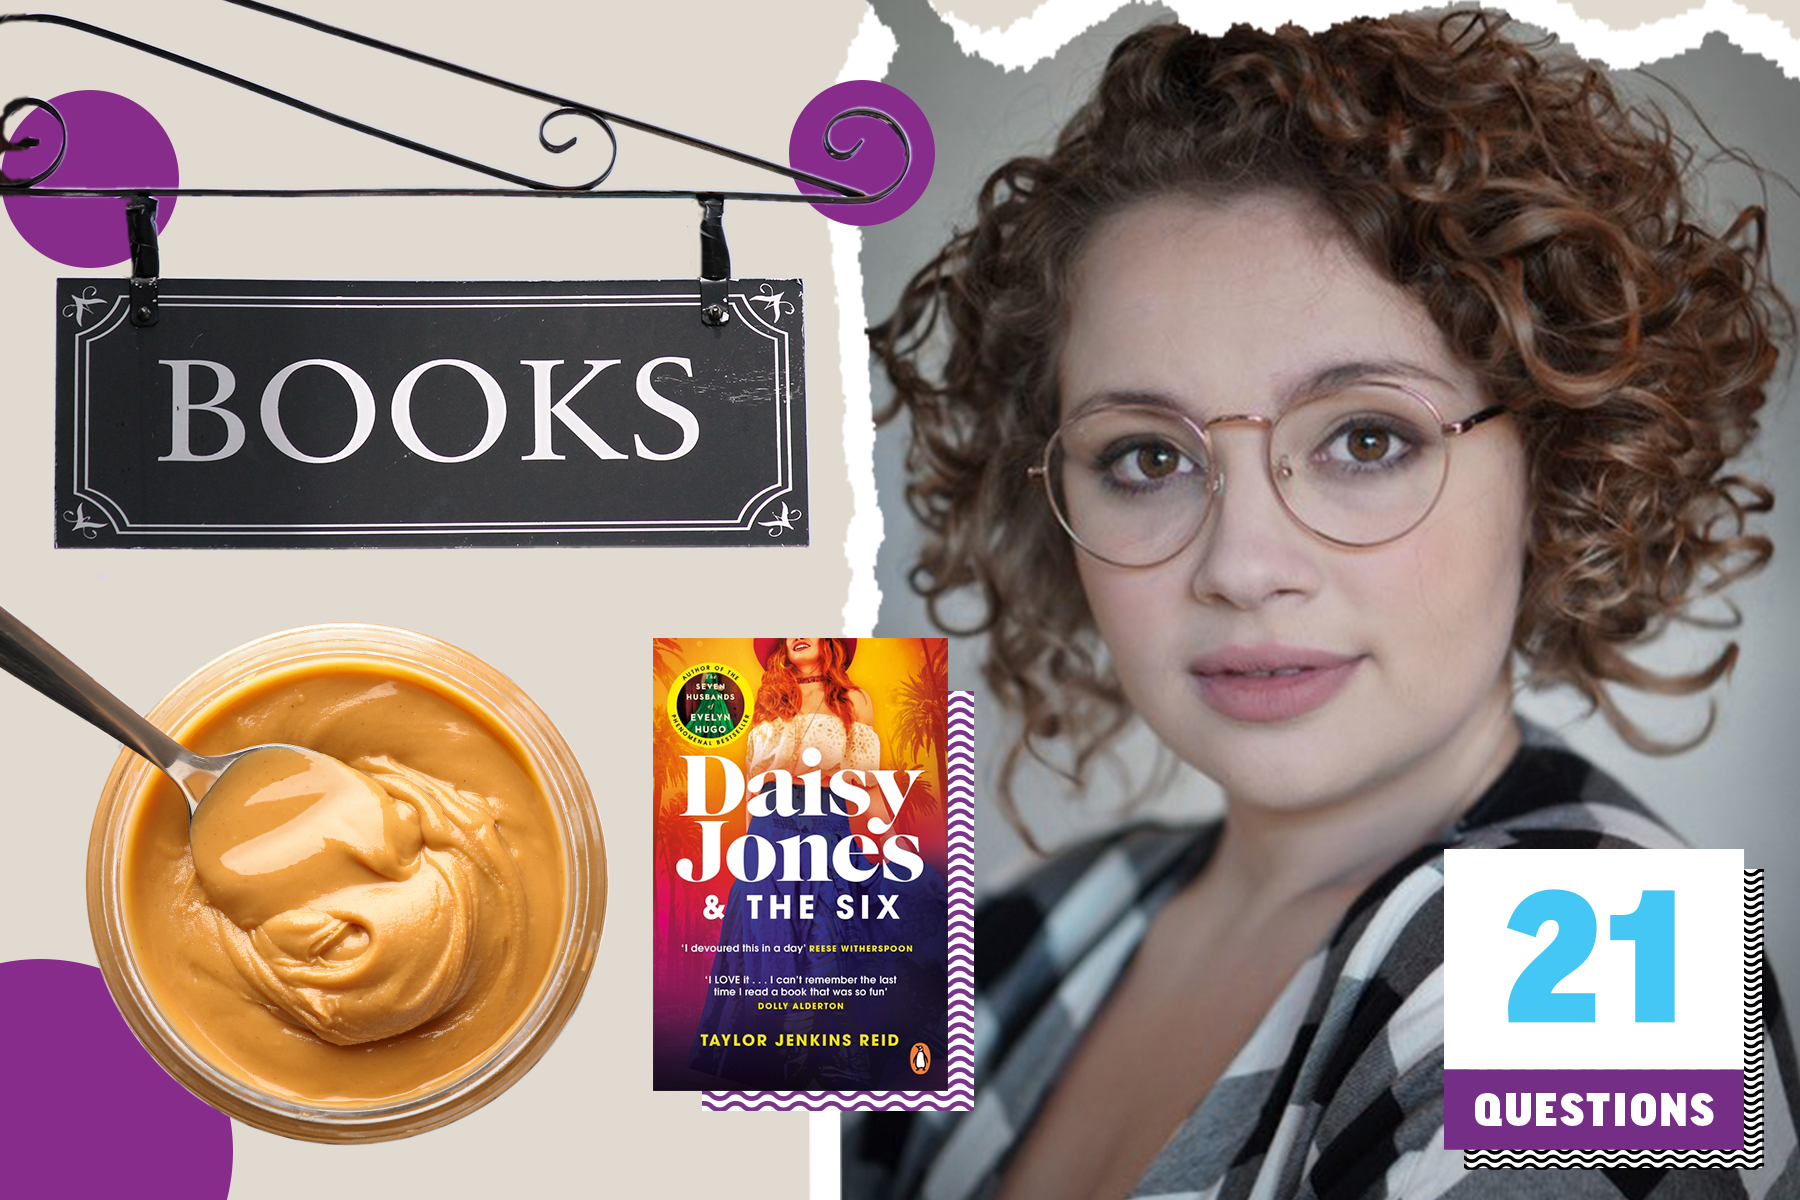 An image showing author Carrie Hope Fletcher on a collage style background. Around her is a bookshop sign, a jar of peanut butter and the book Daisy Jones & the Six. There is also graphic text that says '21 Questions' in blue and purple.